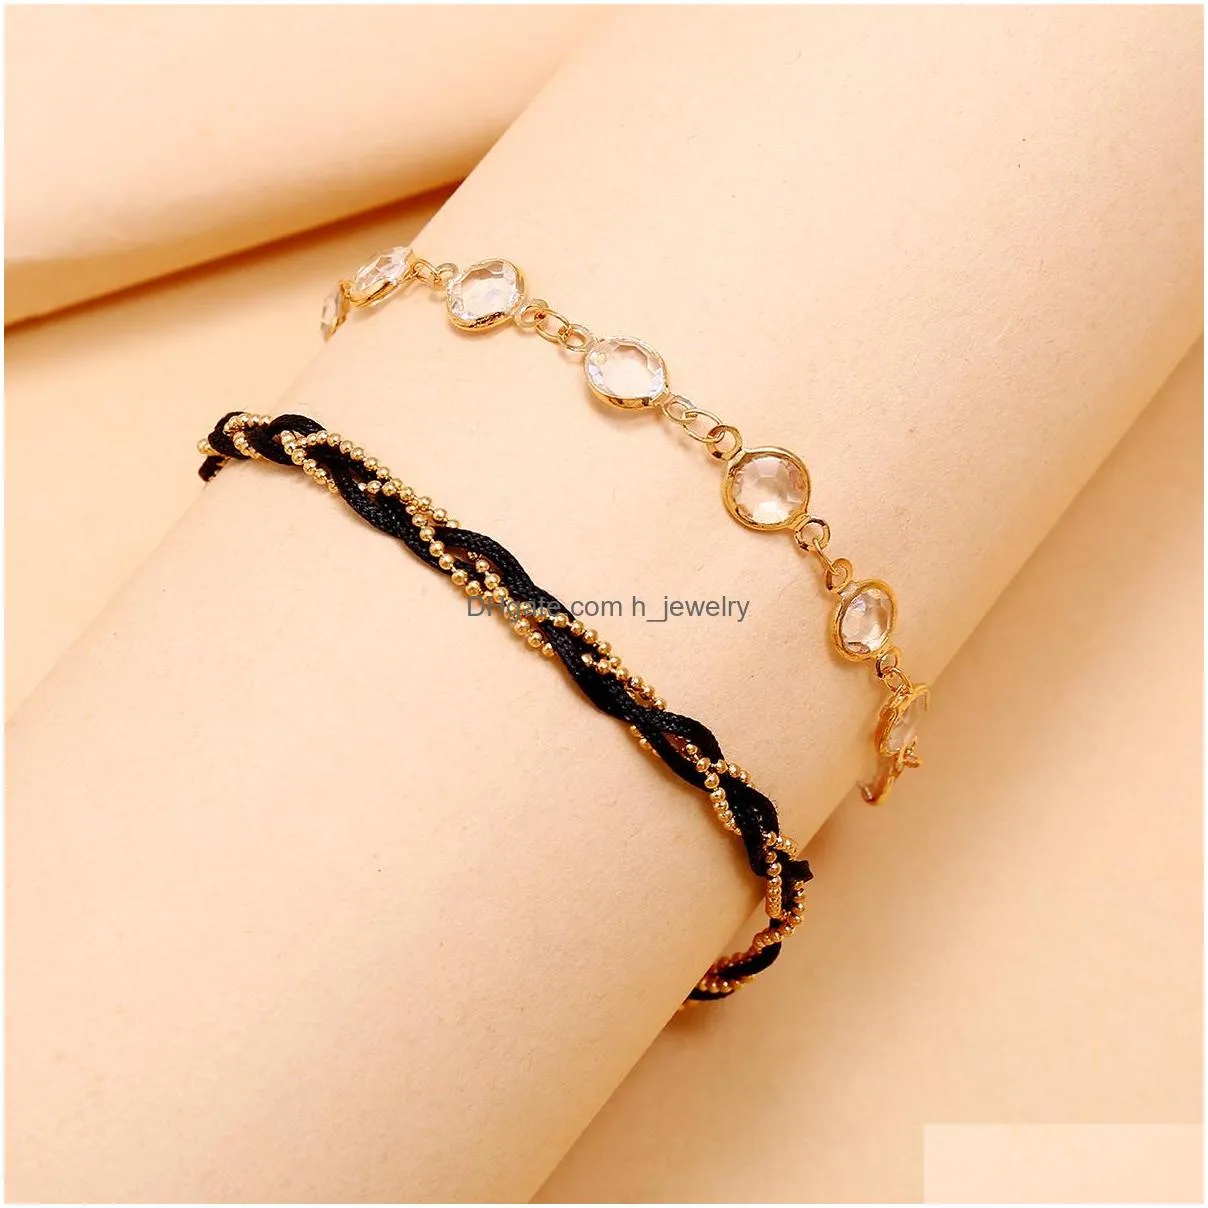 fashion jewelry handmade beads chain transparent rhinstone double layer anklet beach anklets